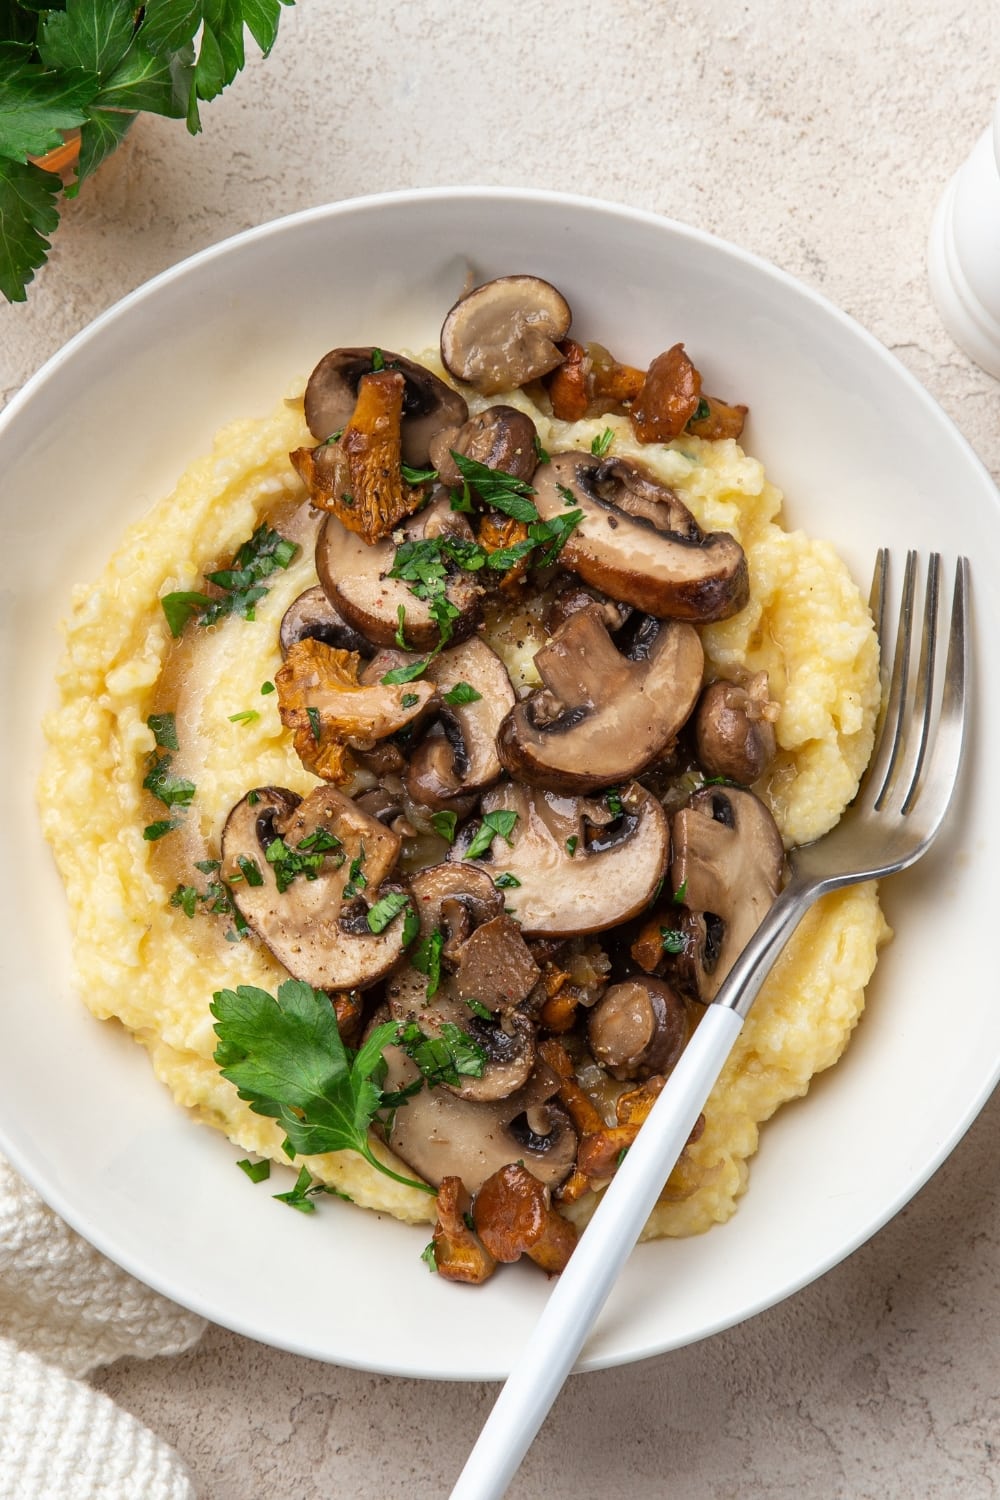 Top View of a Serving of Creamy Vegan Polenta with Fried Mushrooms on Top of Mashed Potatoes 